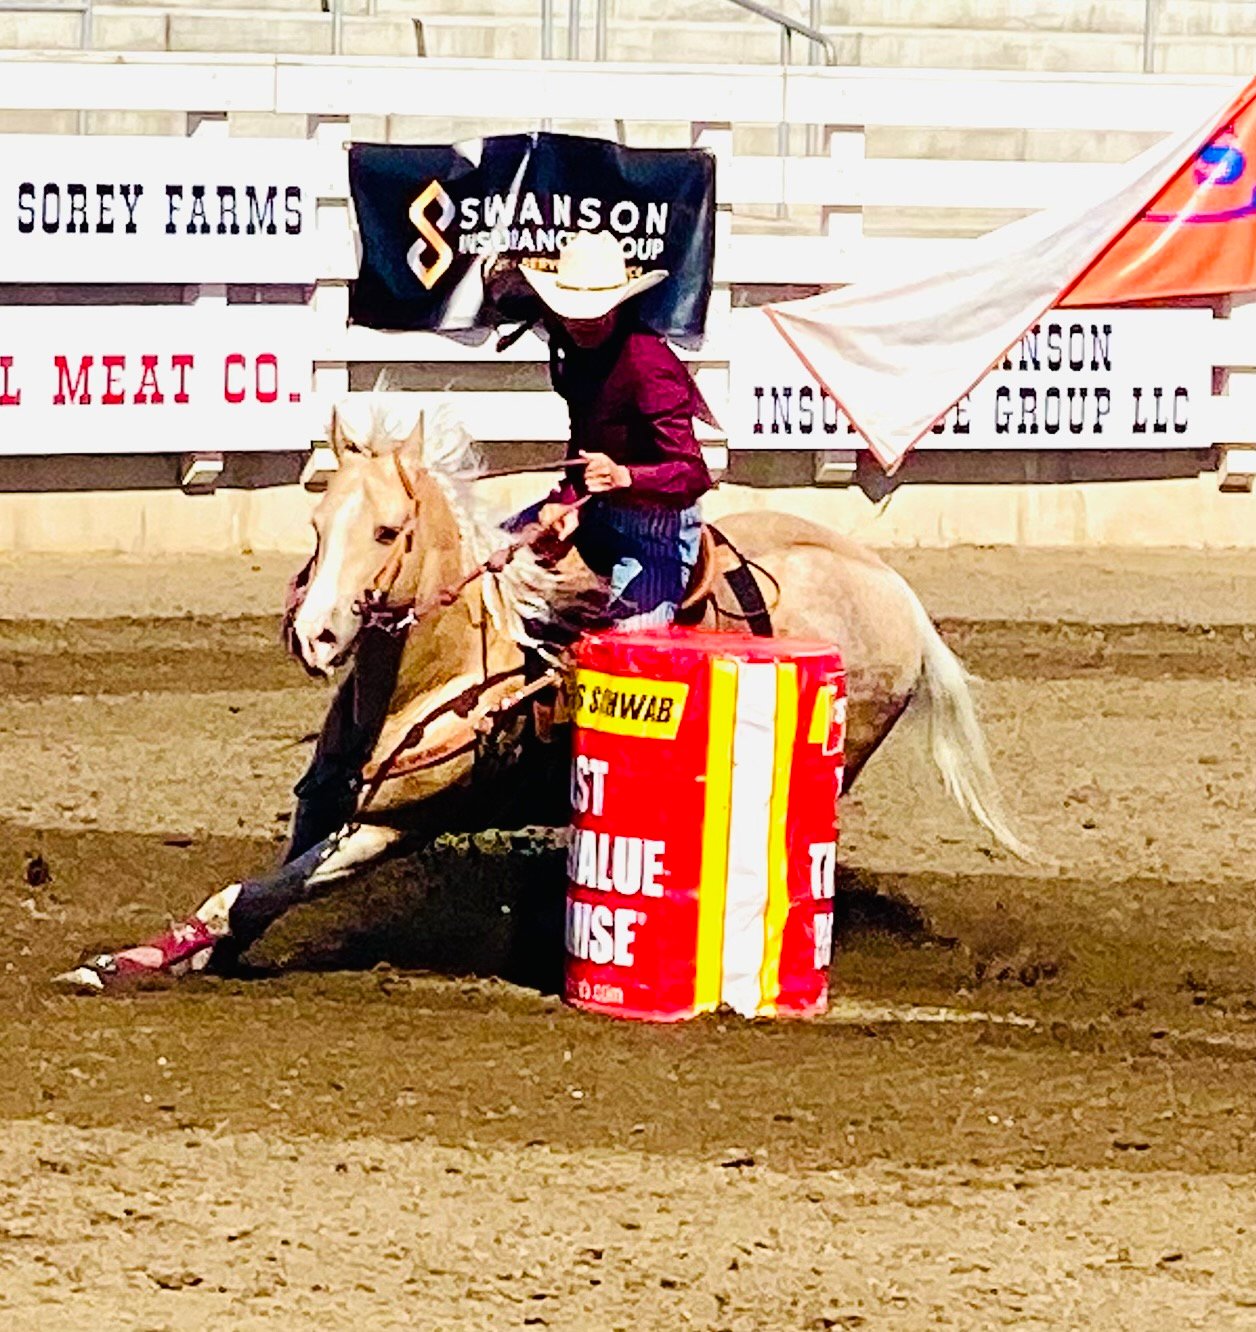 Hailey is shown racing around a barrel with her horse Grizz.